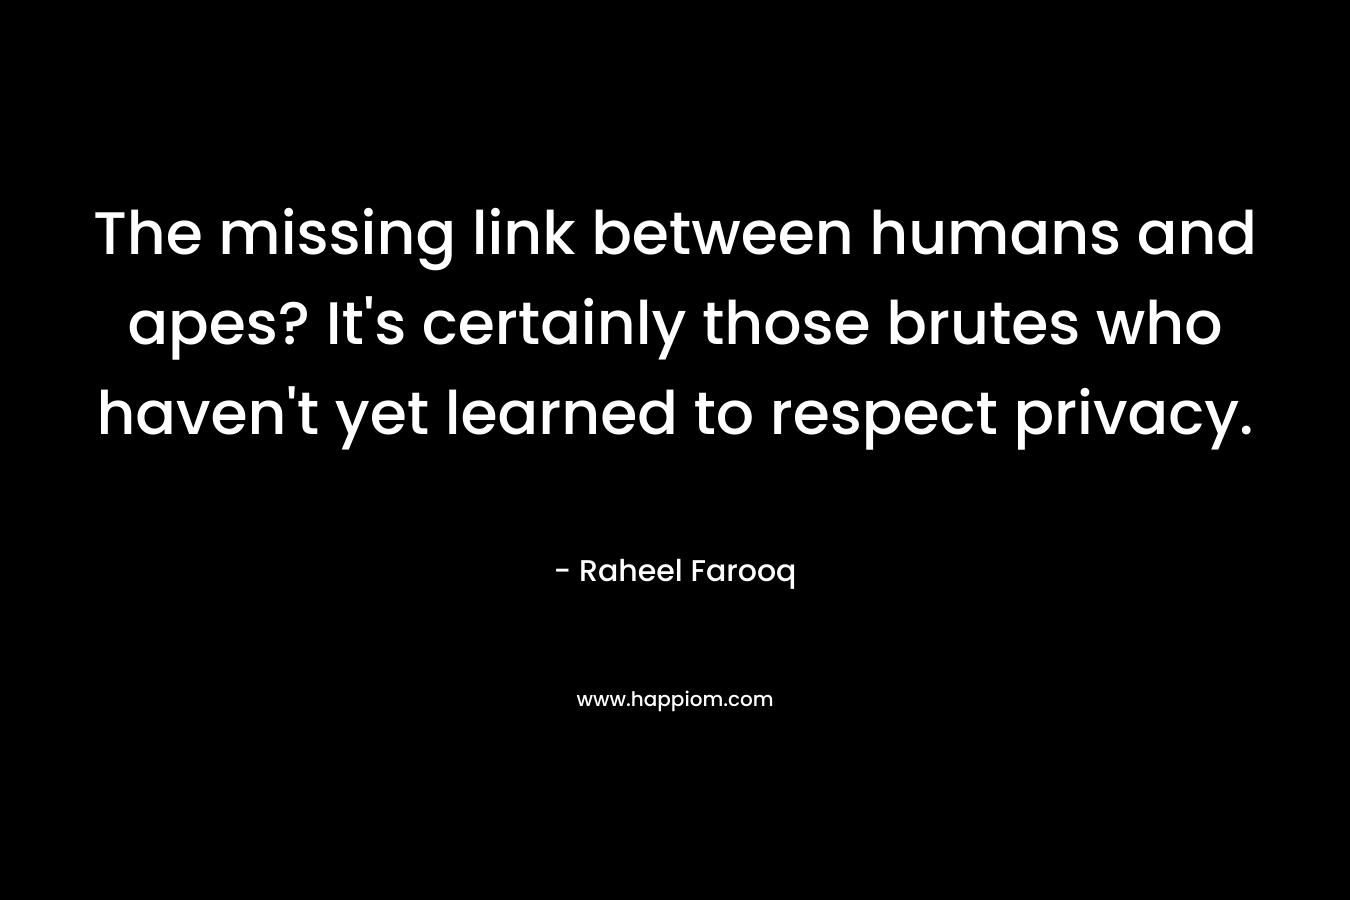 The missing link between humans and apes? It’s certainly those brutes who haven’t yet learned to respect privacy. – Raheel Farooq